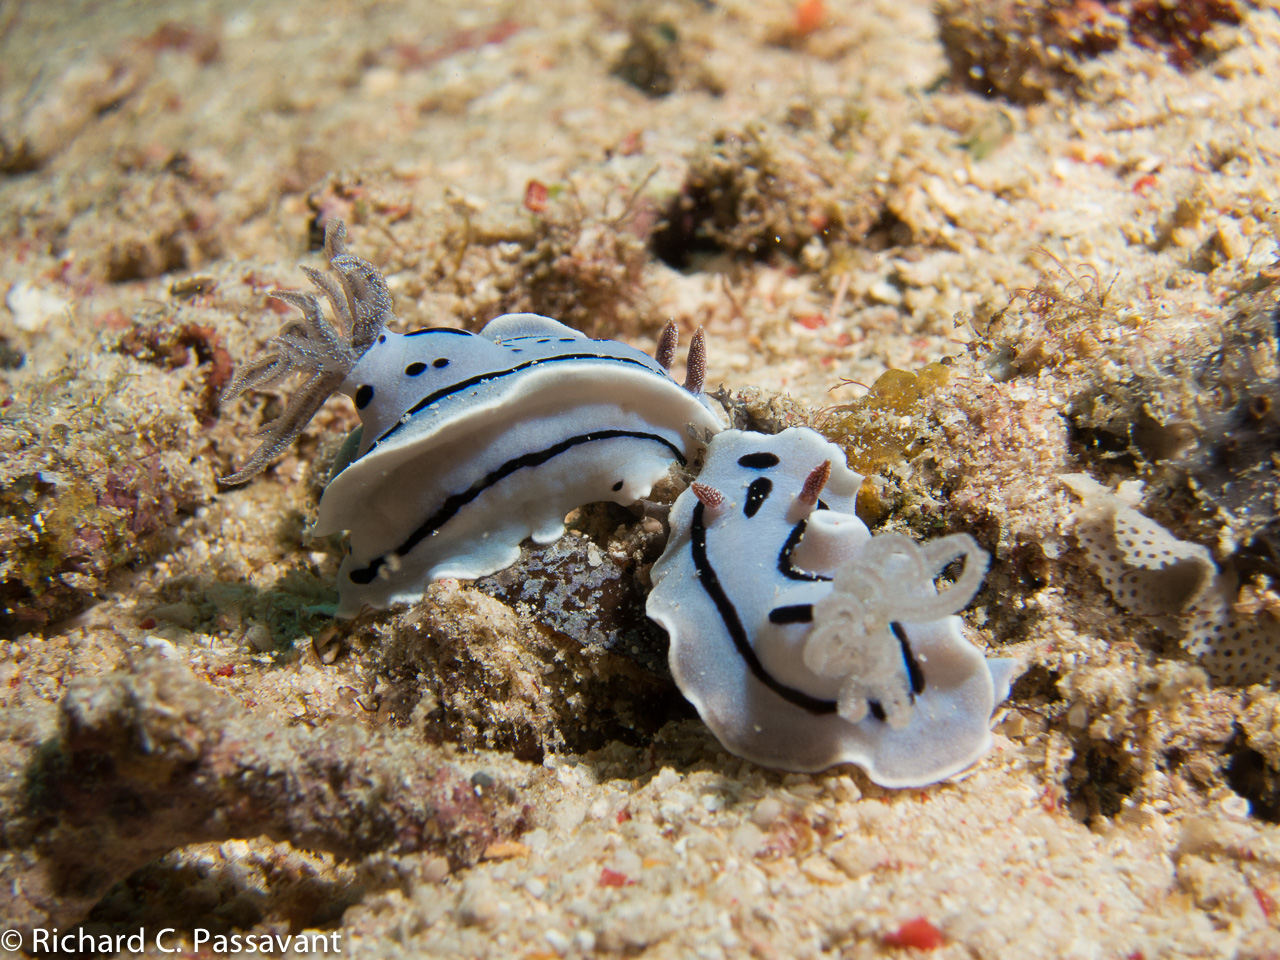 Mr. & Mrs. Nudibranch out for a stroll